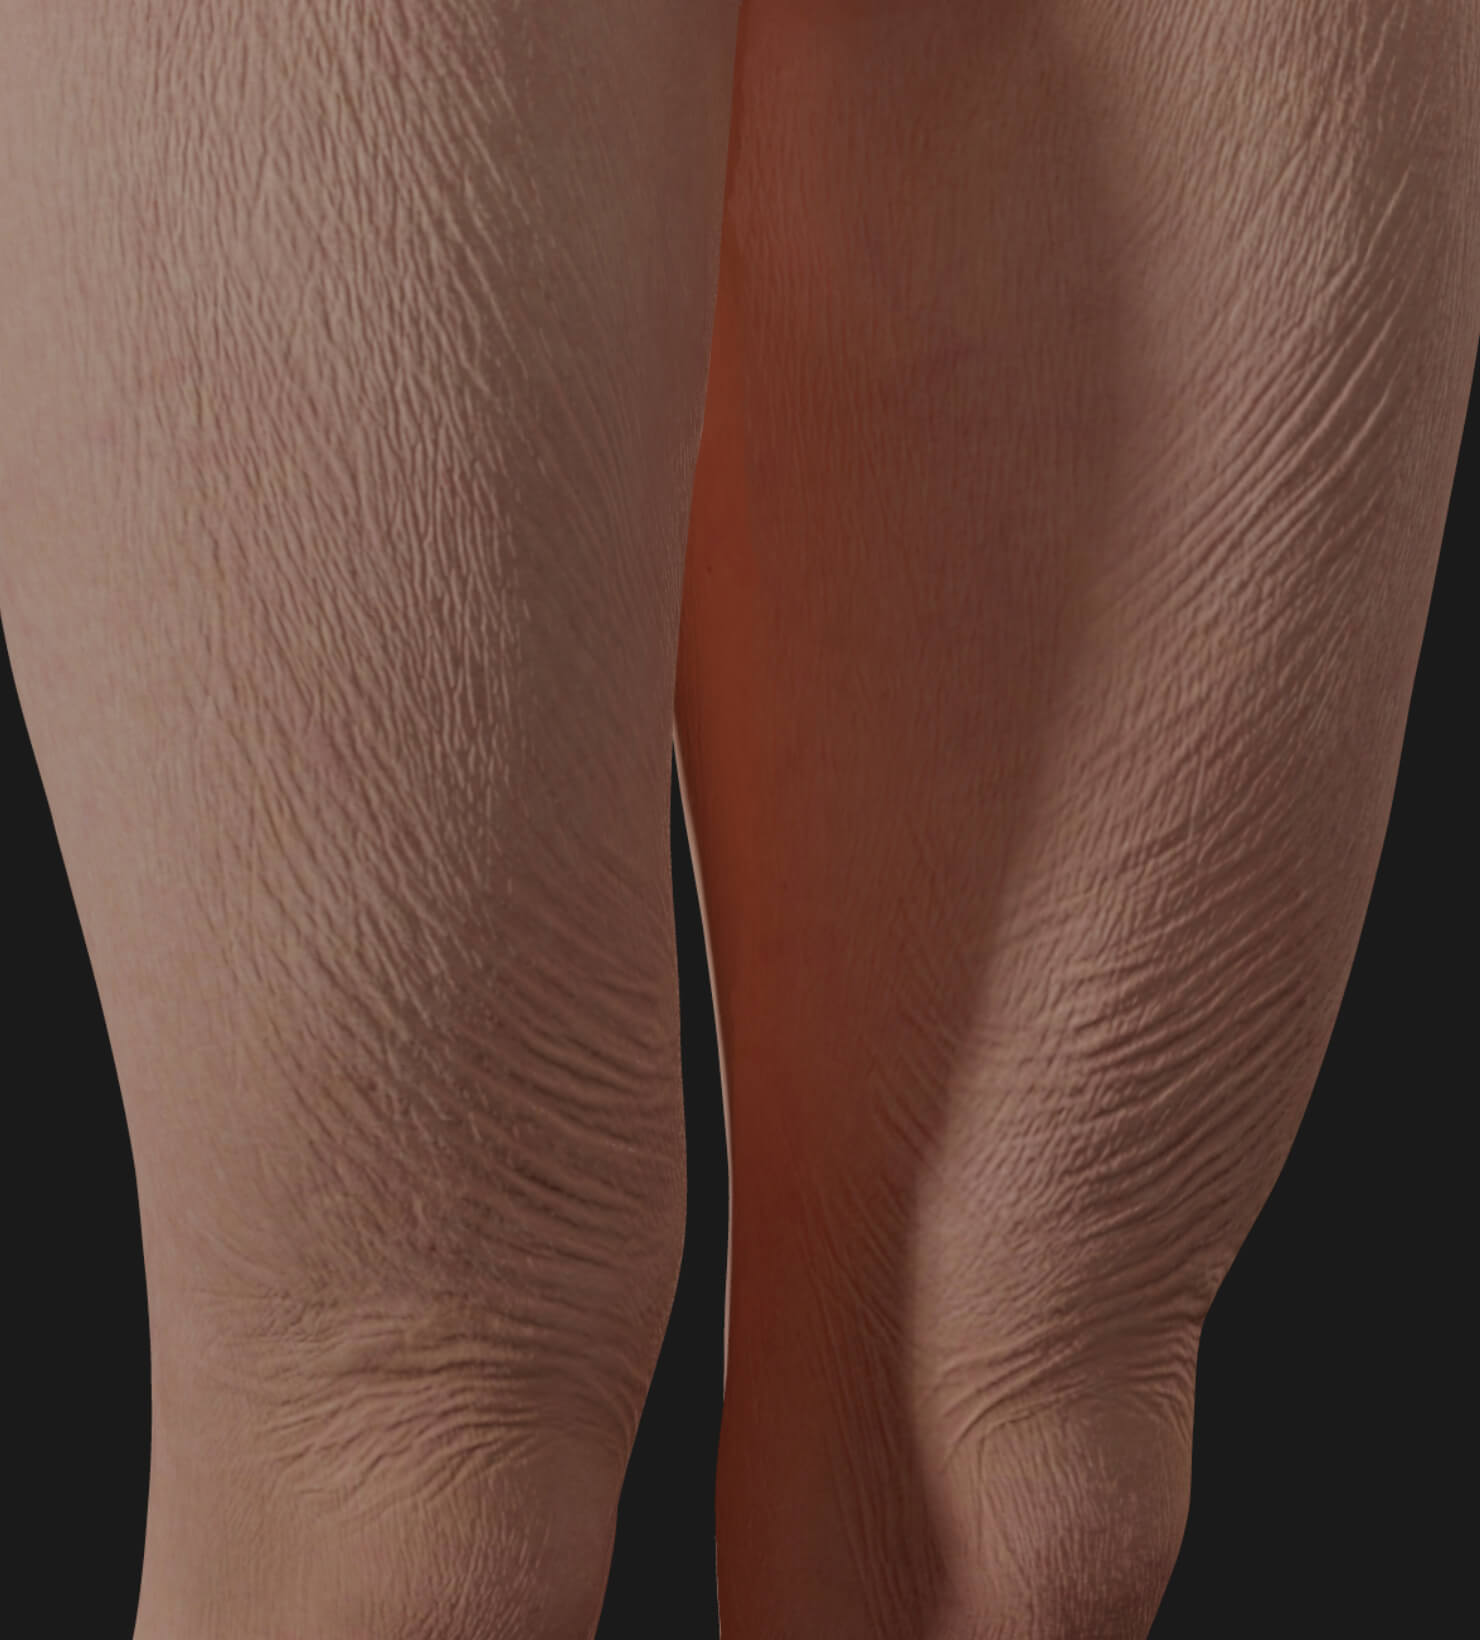 Thighs of a Clinique Chloé female patient showing skin laxity to be treated with Sculptra injections for skin tightening